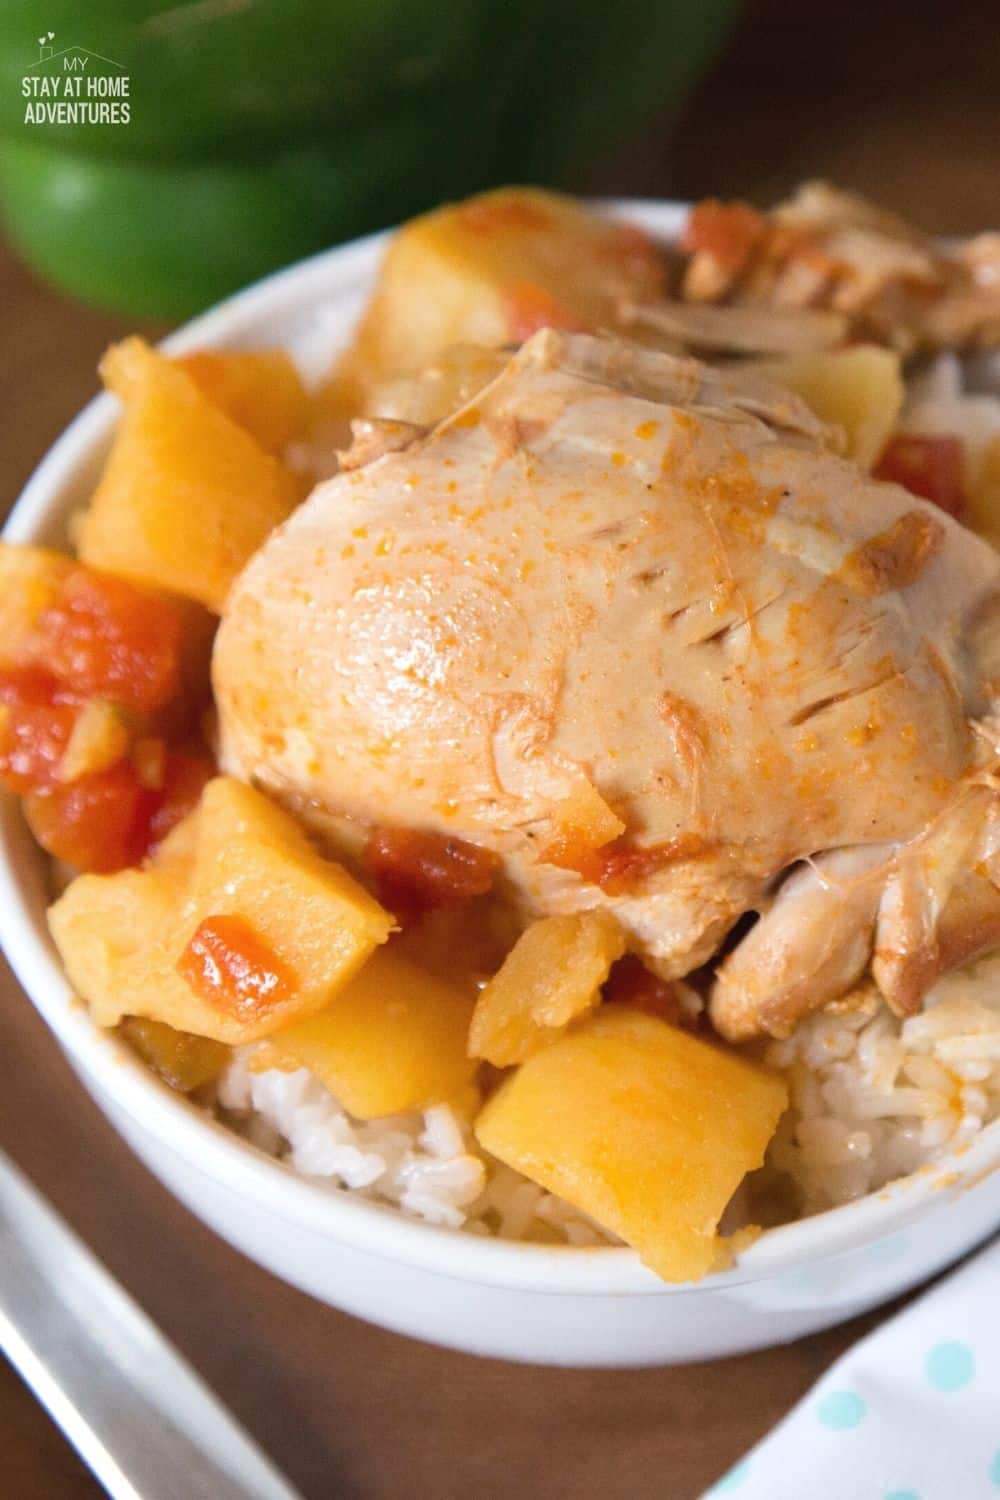 Learn how to create this delicious pollo guisado recipe using your Instant Pot! Puerto Rican chicken stew is so easy to make and taste just like home. via @mystayathome